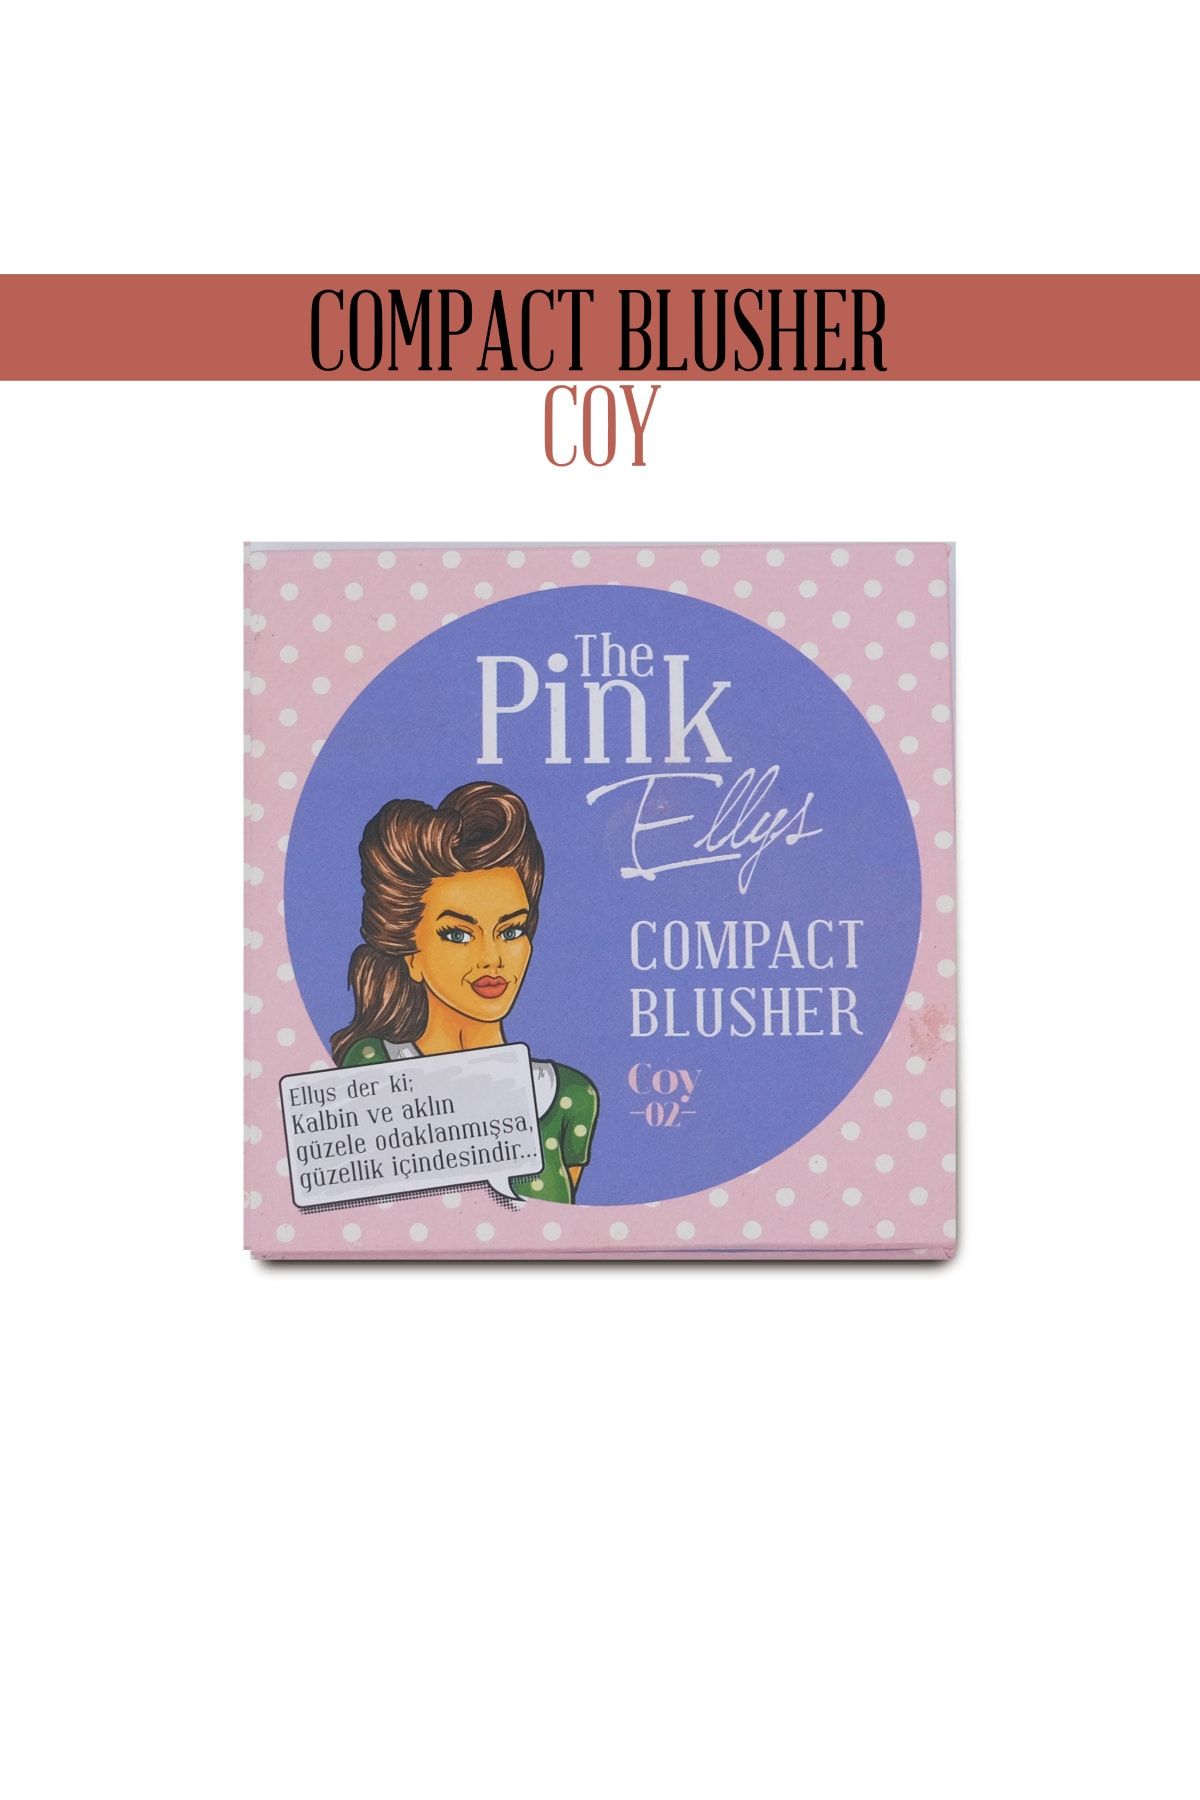 The Pink Ellys Compact Blusher Coy